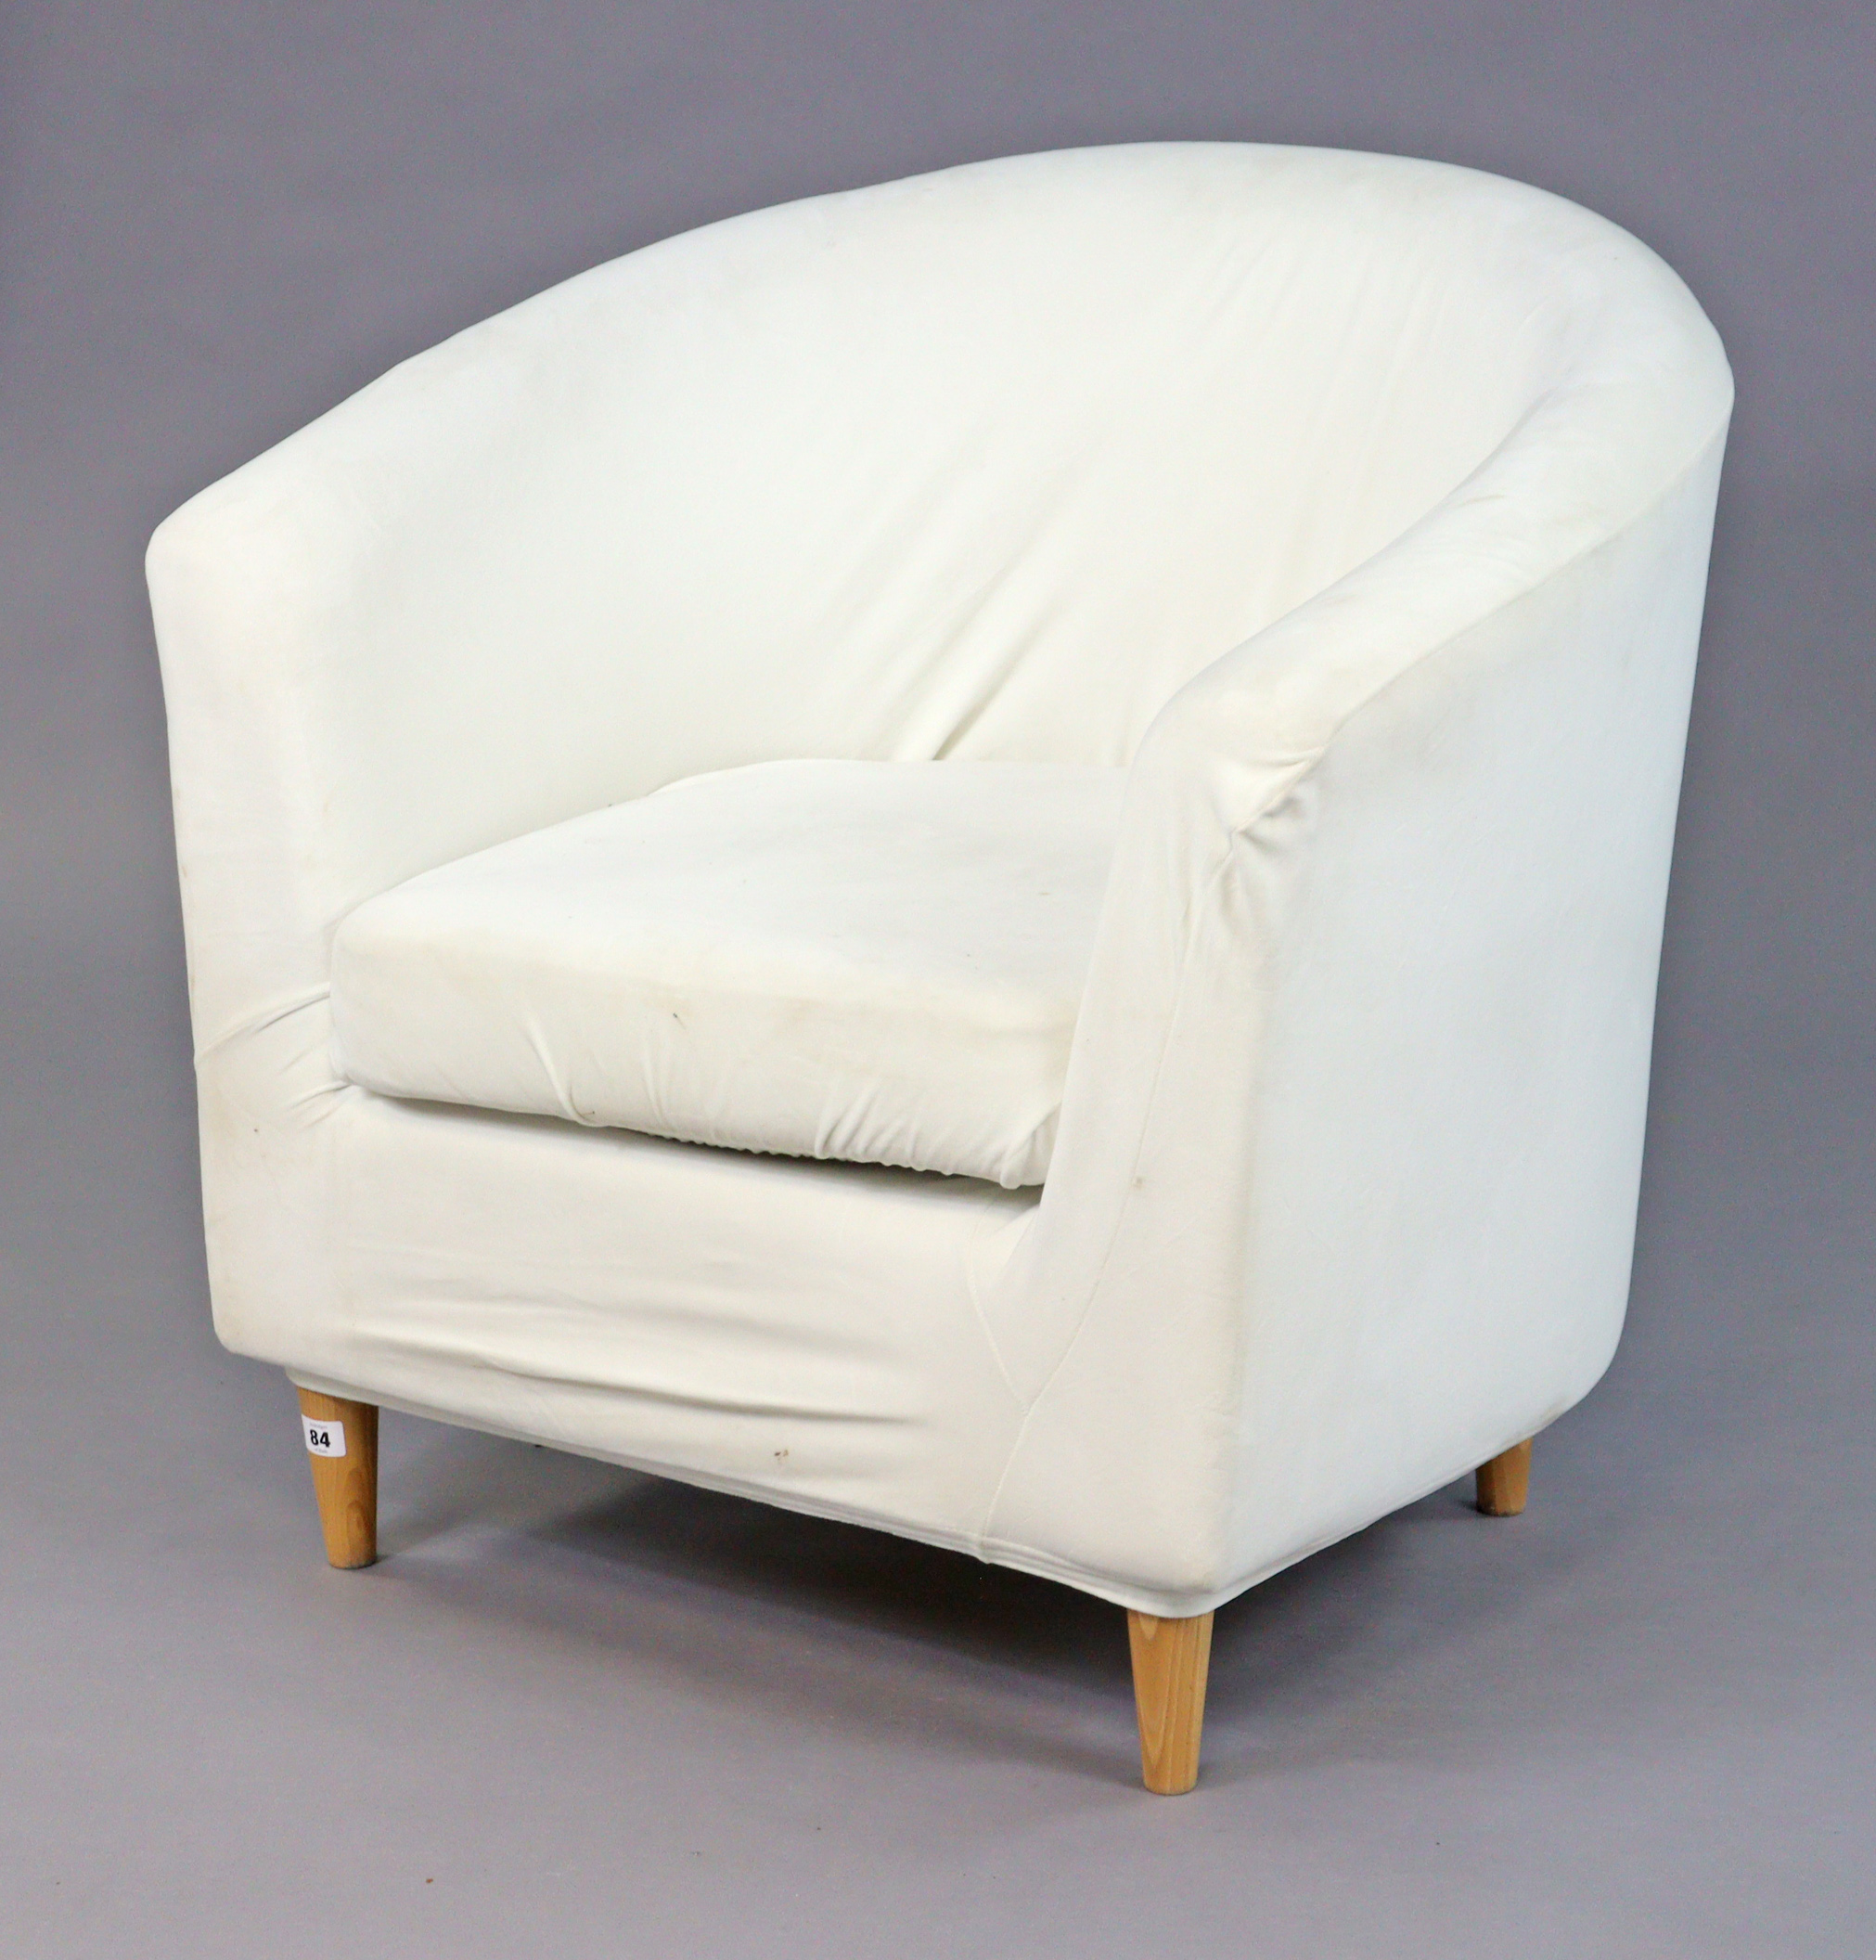 An Ikea tub-shaped chair upholstered off-white material, & on four round tapered legs.